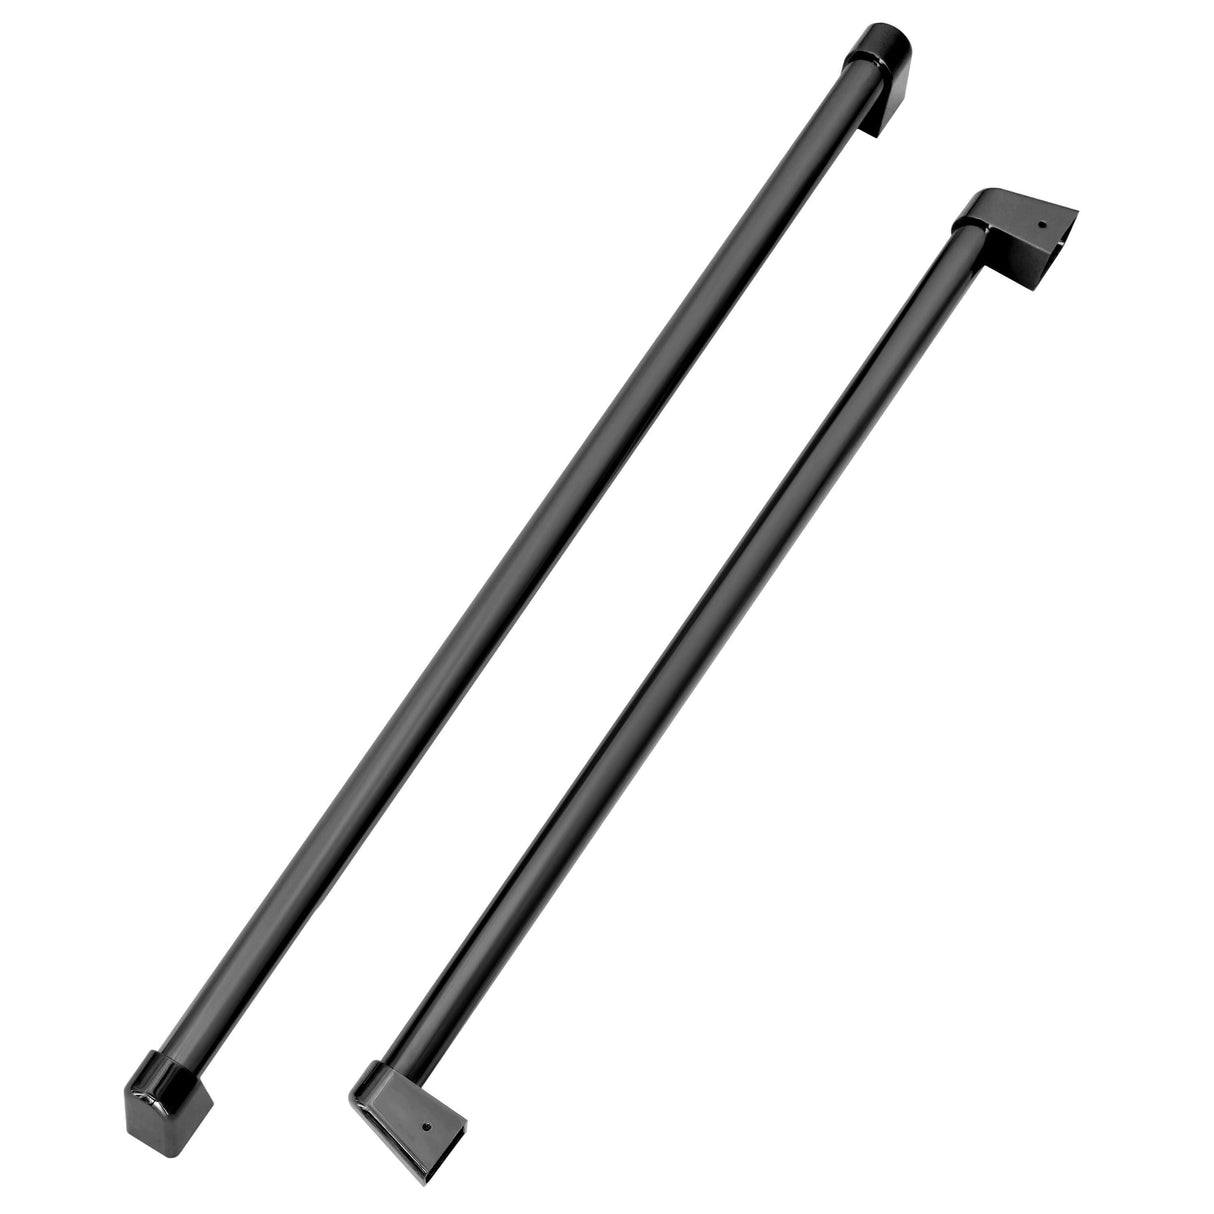 ZLINE 36 in. Refrigerator Panels and Handles in Black Stainless Steel for Built-in Refrigerators (RPBIV-BS-36)